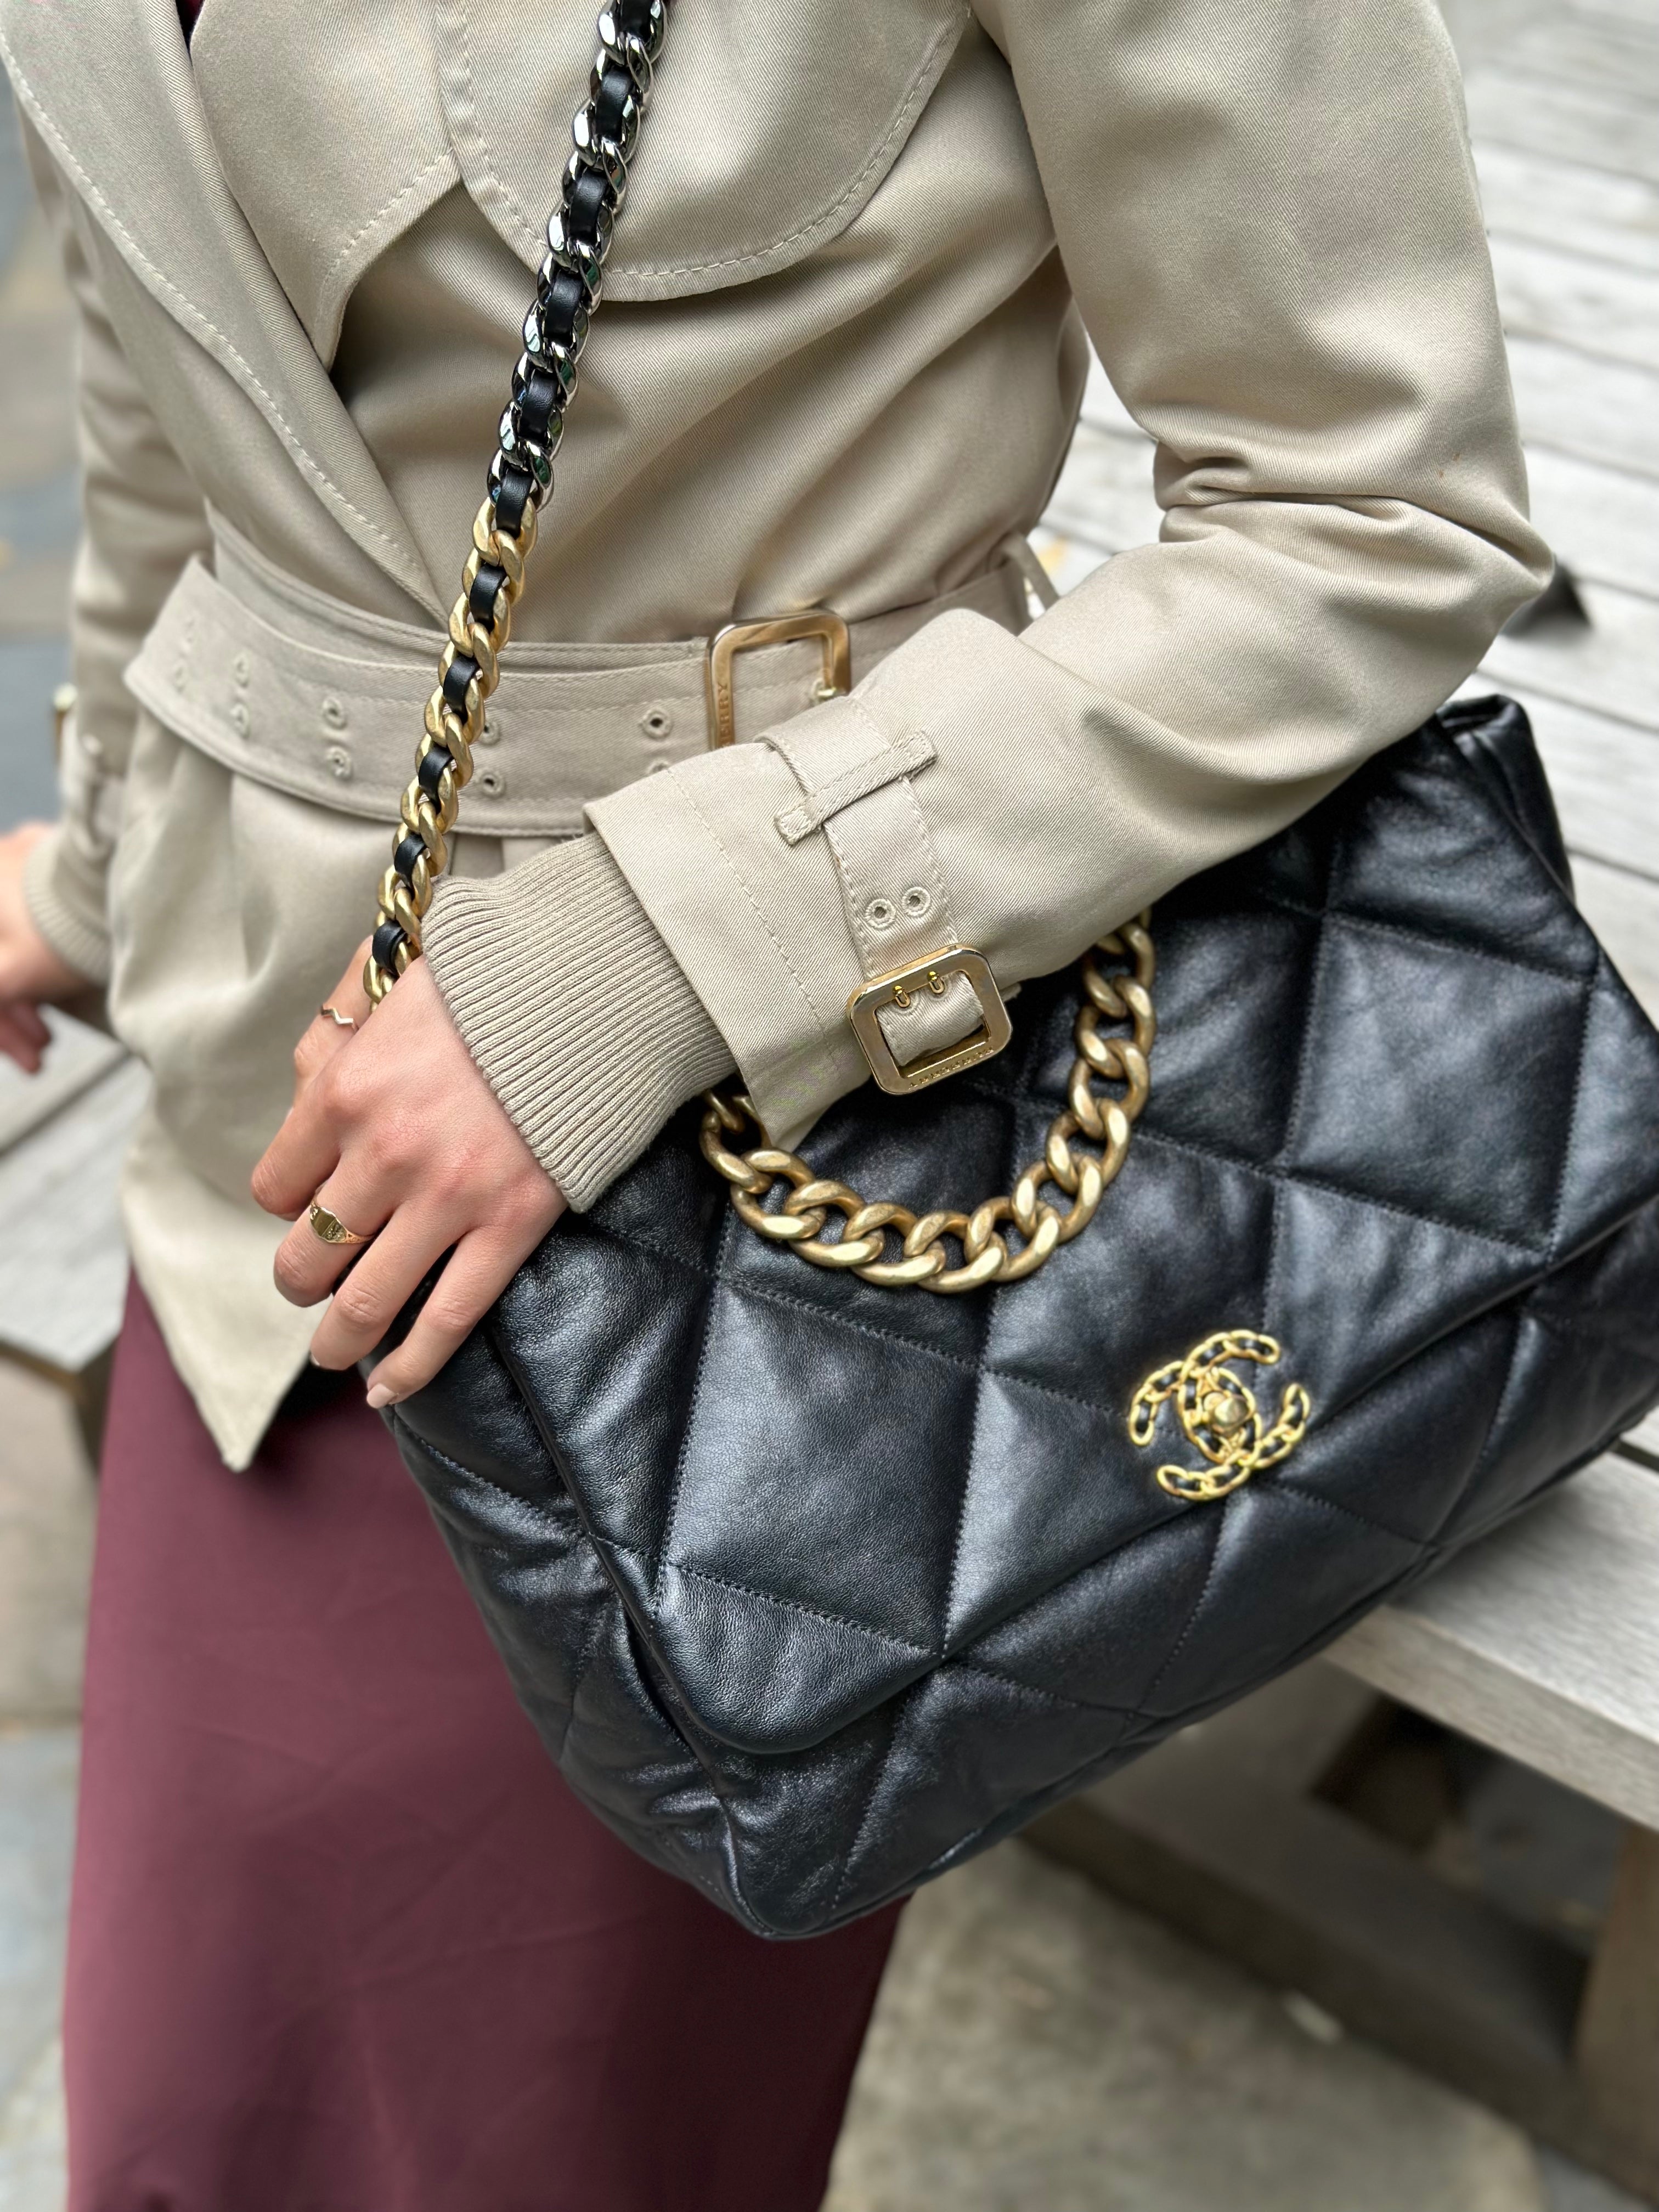 THE ULTIMATE GUIDE TO BUYING CHANEL ONLINE: HOW TO FIND AUTHENTIC